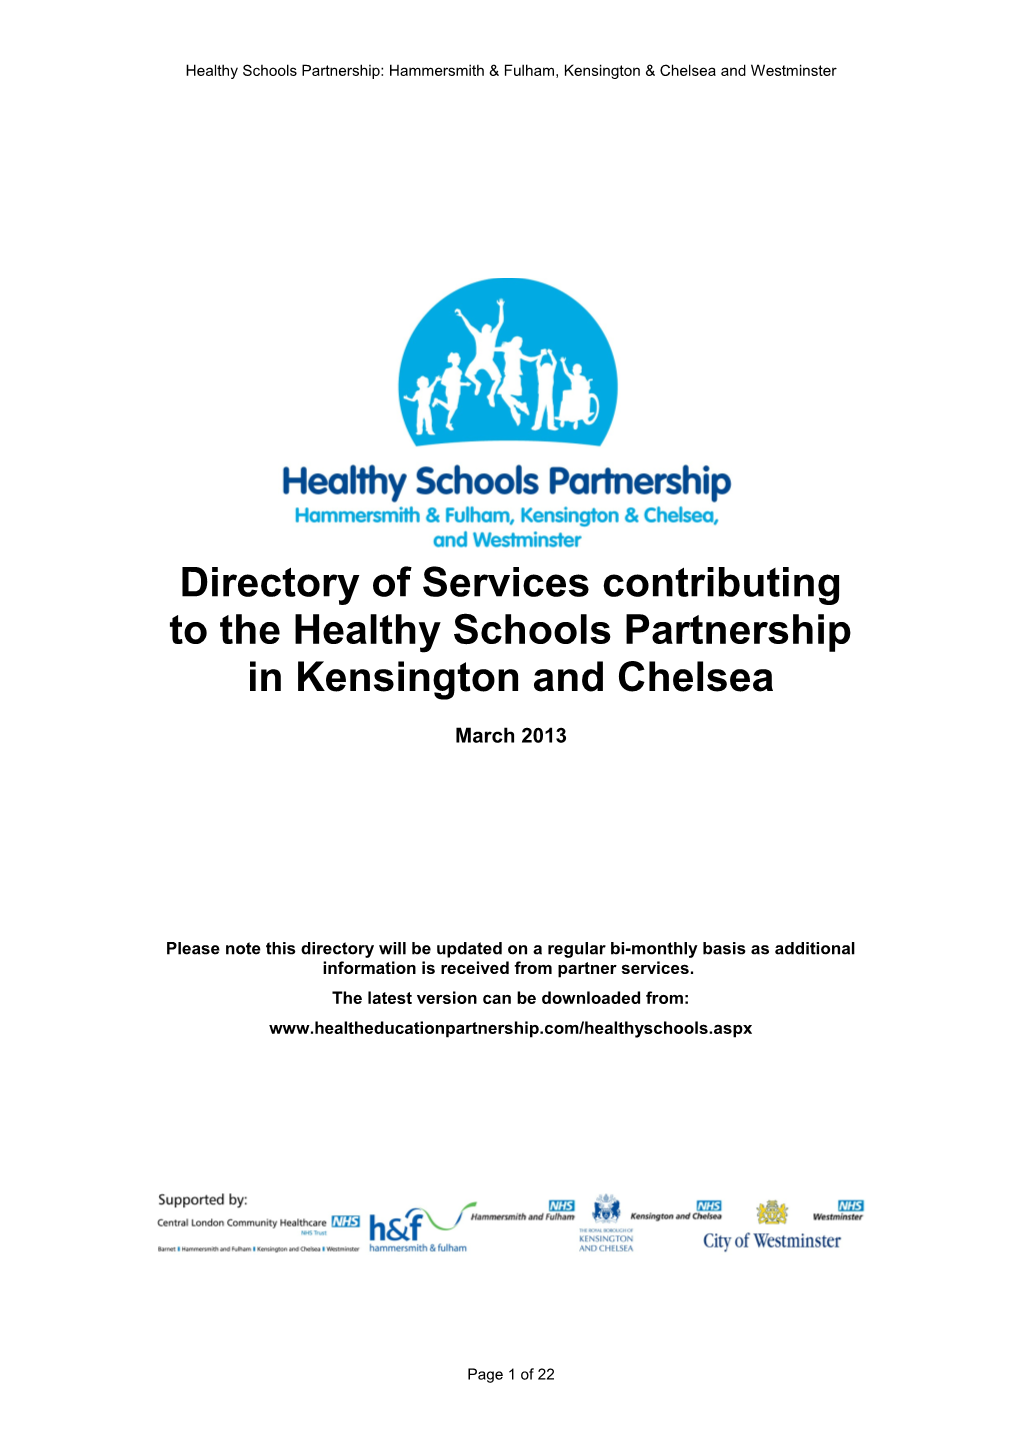 Directory of Services Contributing to the Healthy Schools Partnership in Kensington And